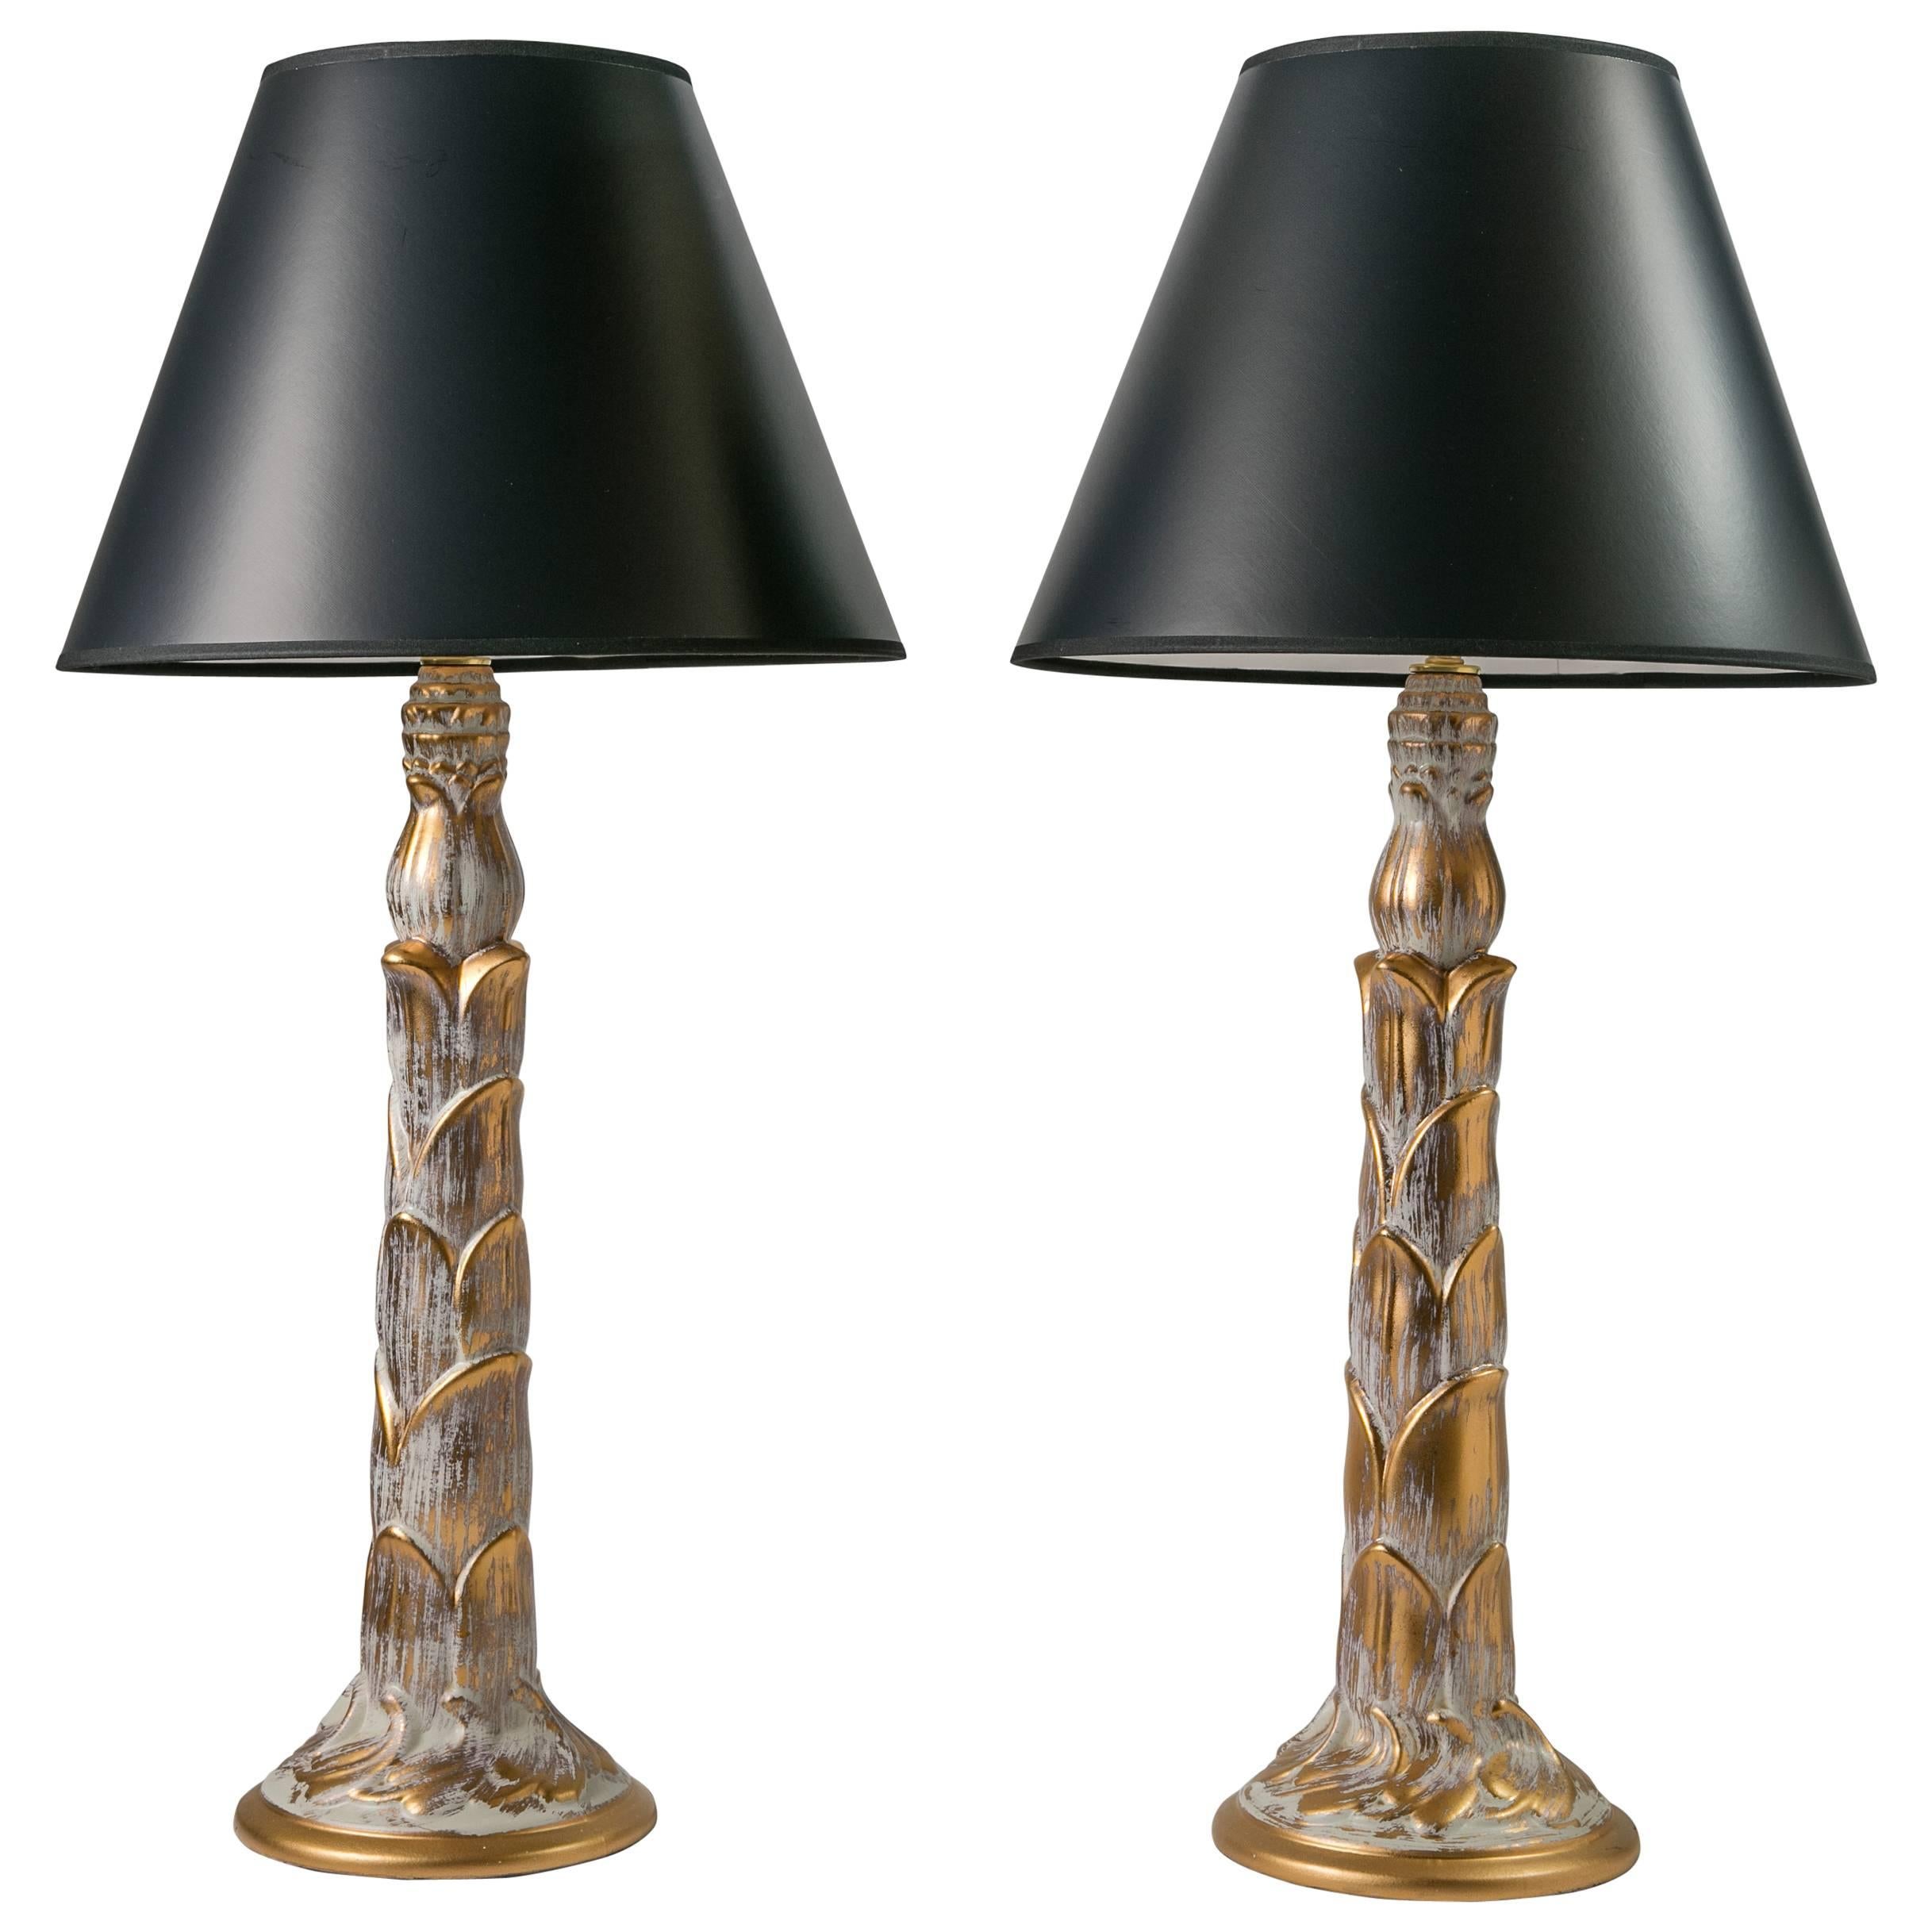 1950s Gilt Palm-Style Ceramic Lamps, Pair For Sale